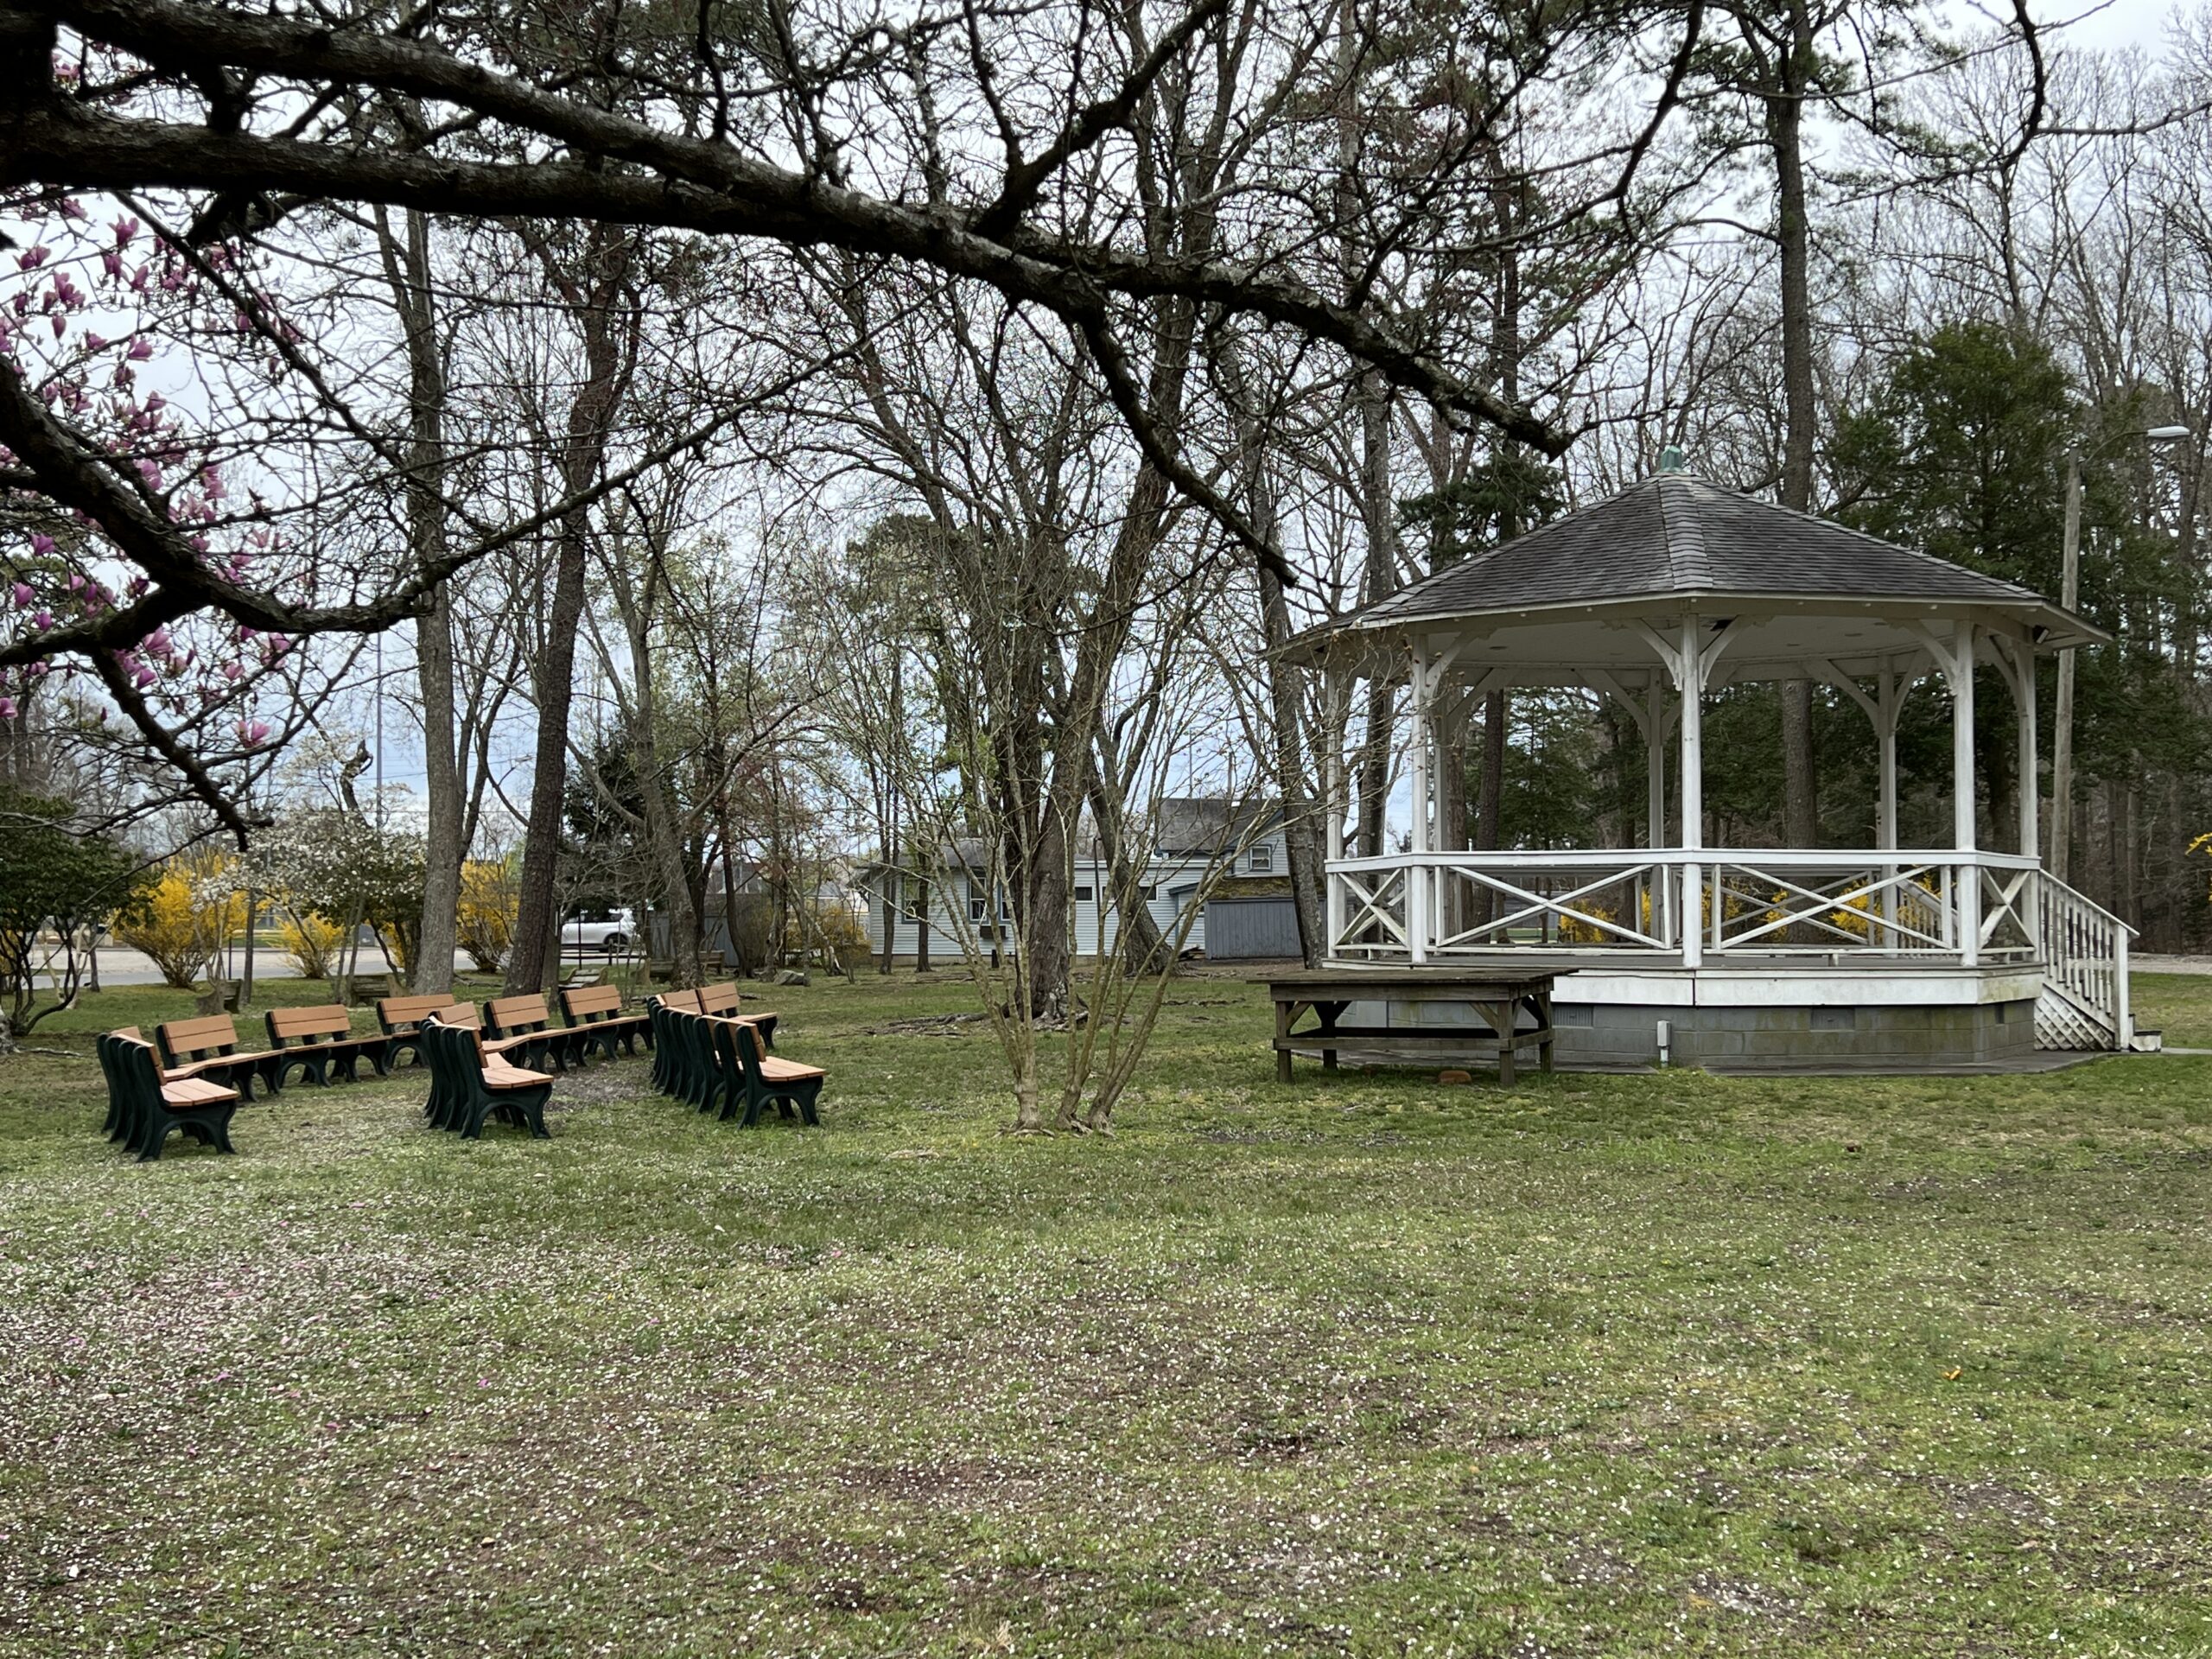 Birch Grove Park in Northfield NJ Gazebo with benches close up WIDE image